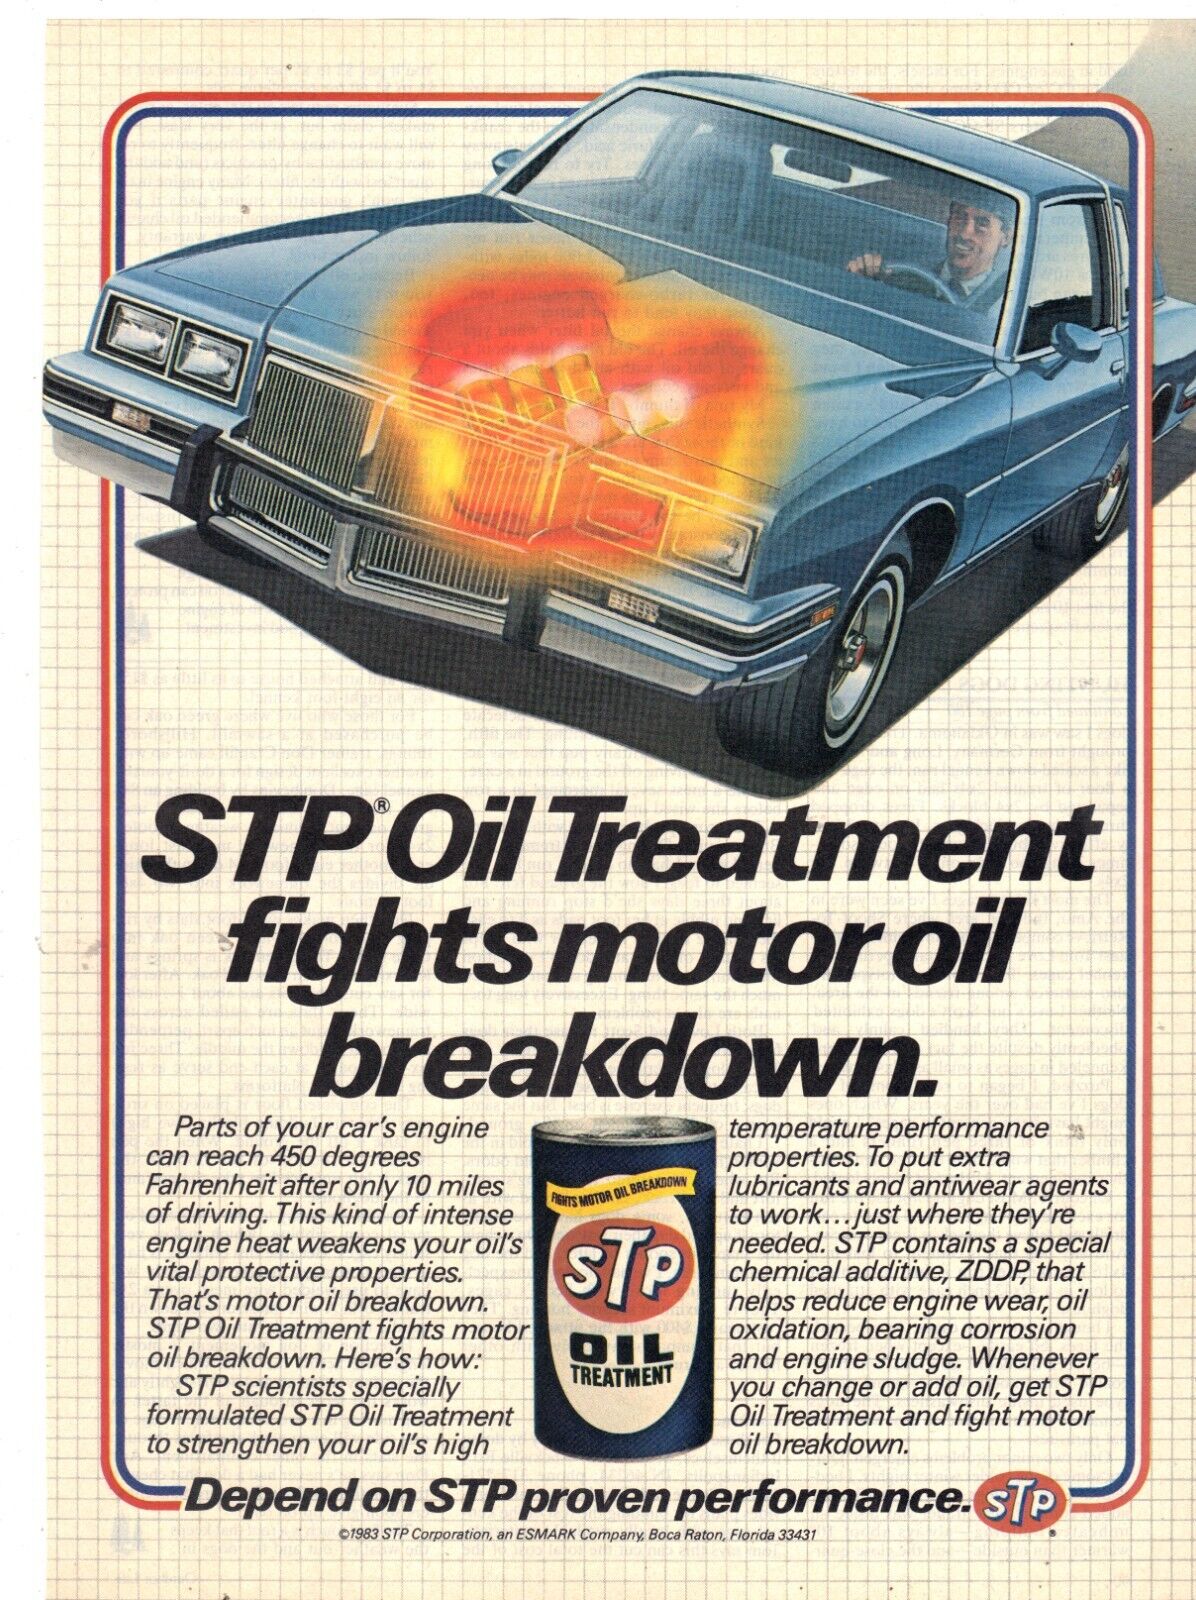 Vintage 1984 Print Ad for STP Oil Treatment and Players Cigarettes